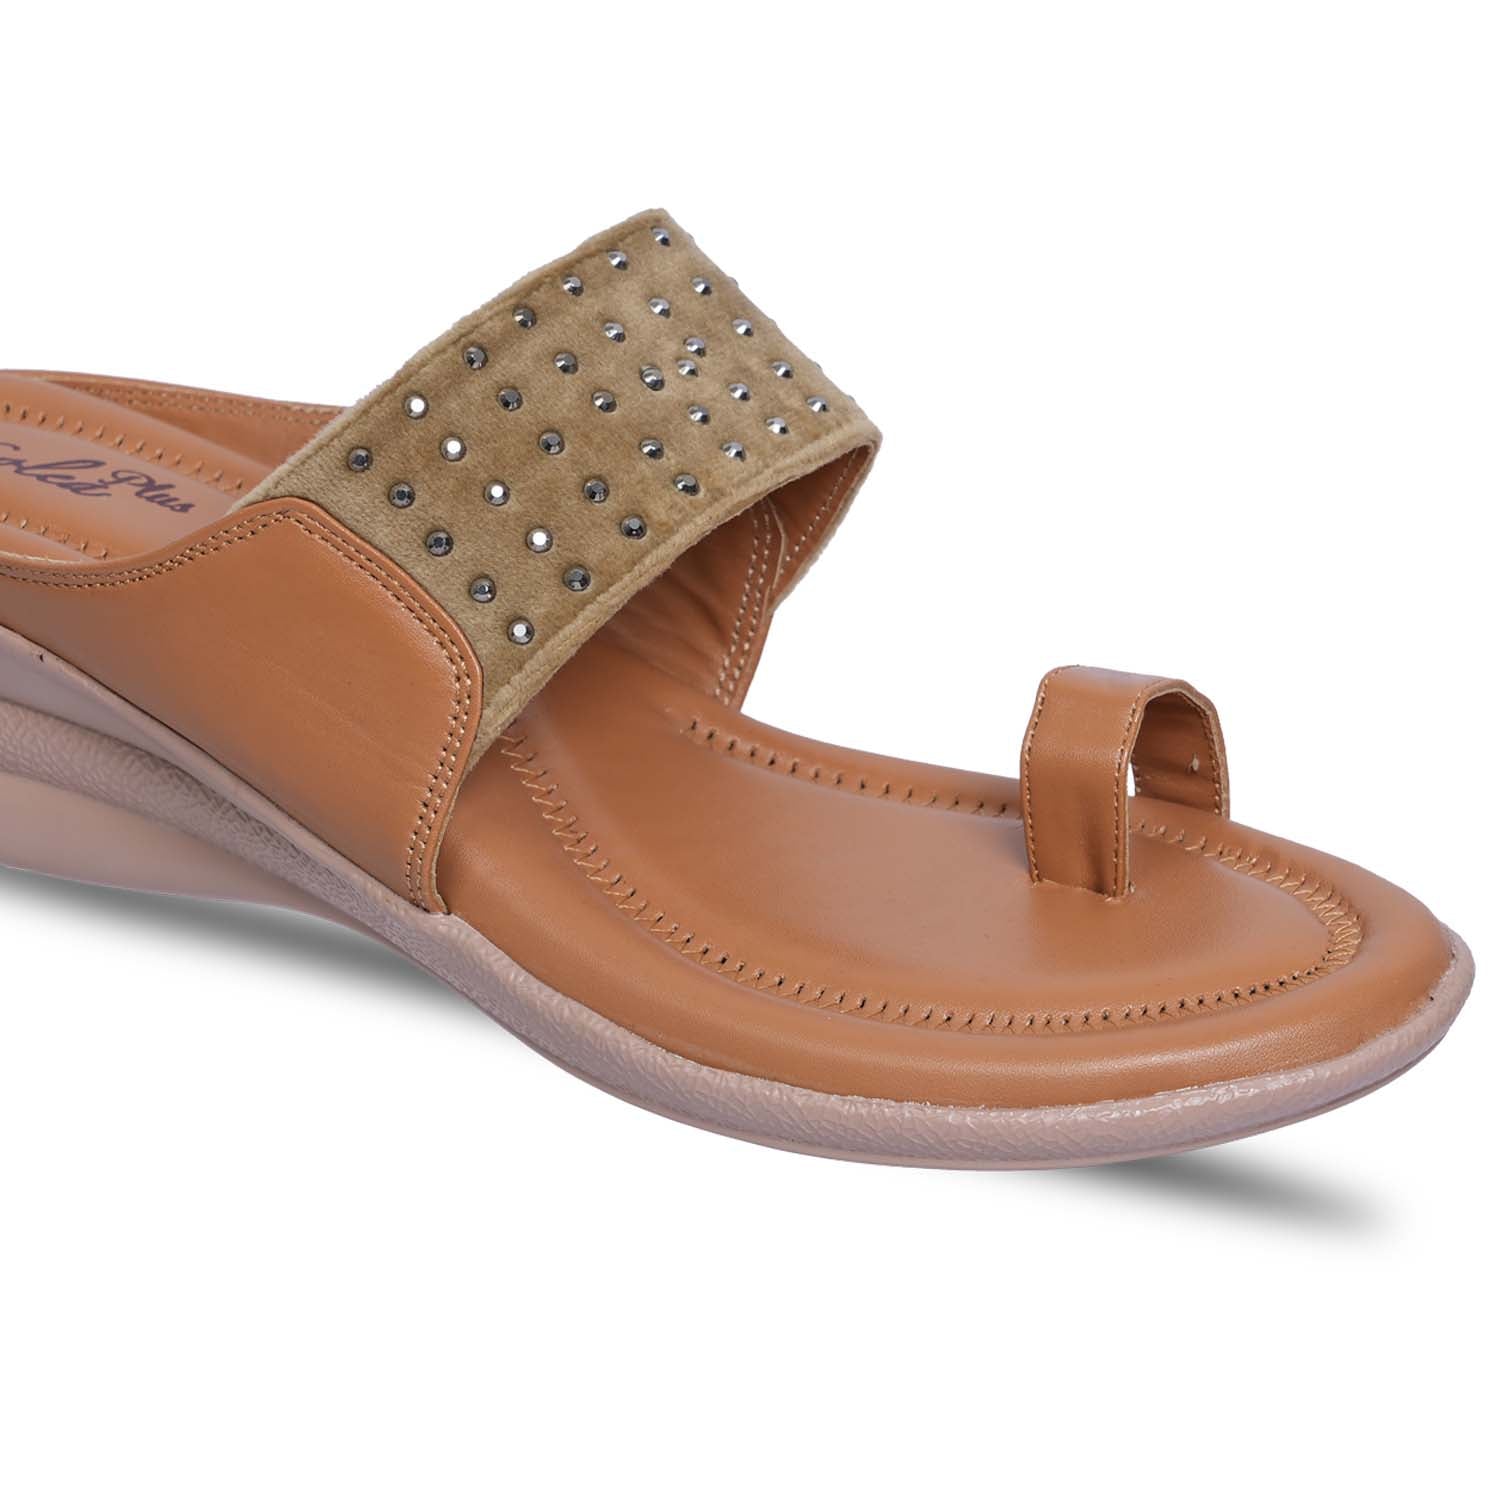 Paragon R1016L Women Sandals | Casual &amp; Formal Sandals | Stylish, Comfortable &amp; Durable | For Daily &amp; Occasion Wear